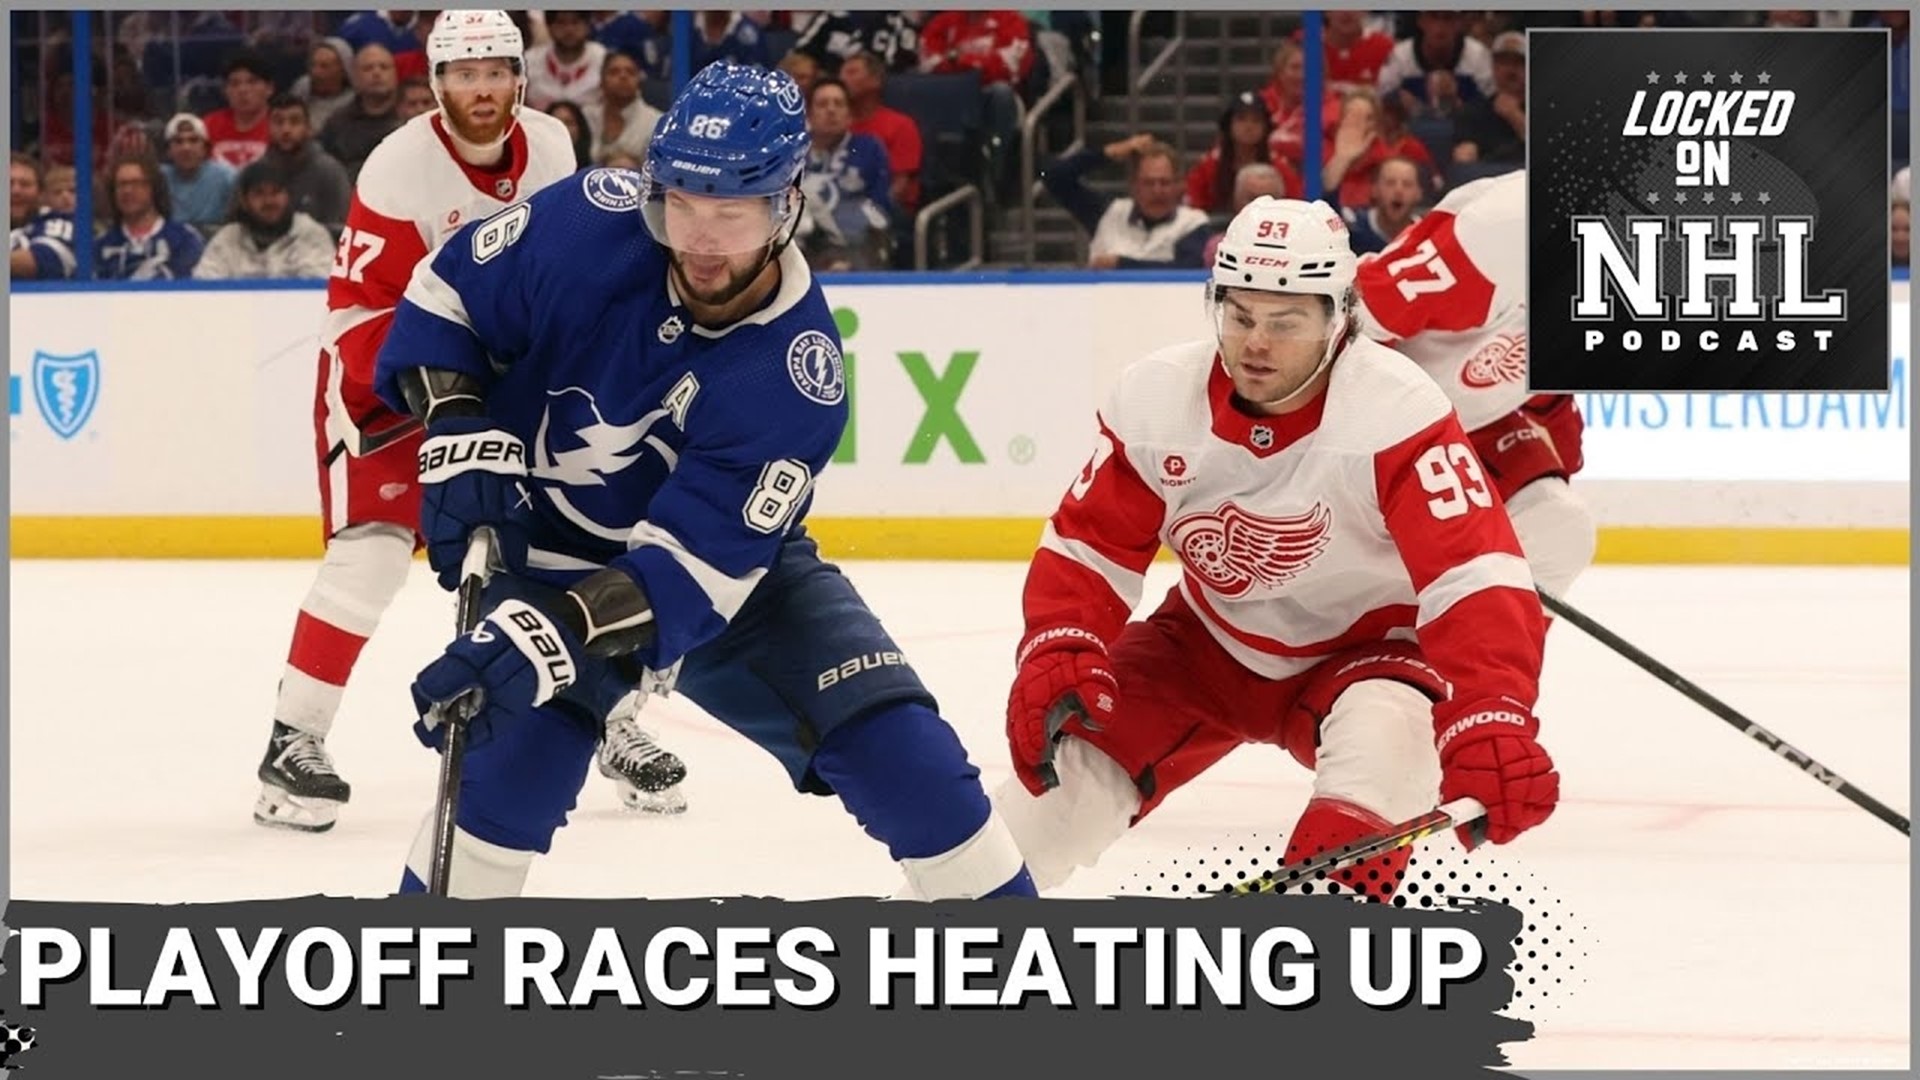 The playoff races are heating up in the Eastern Conference. There are still 6 teams fighting for the final two spots in the Stanley Cup Playoffs and we discuss their